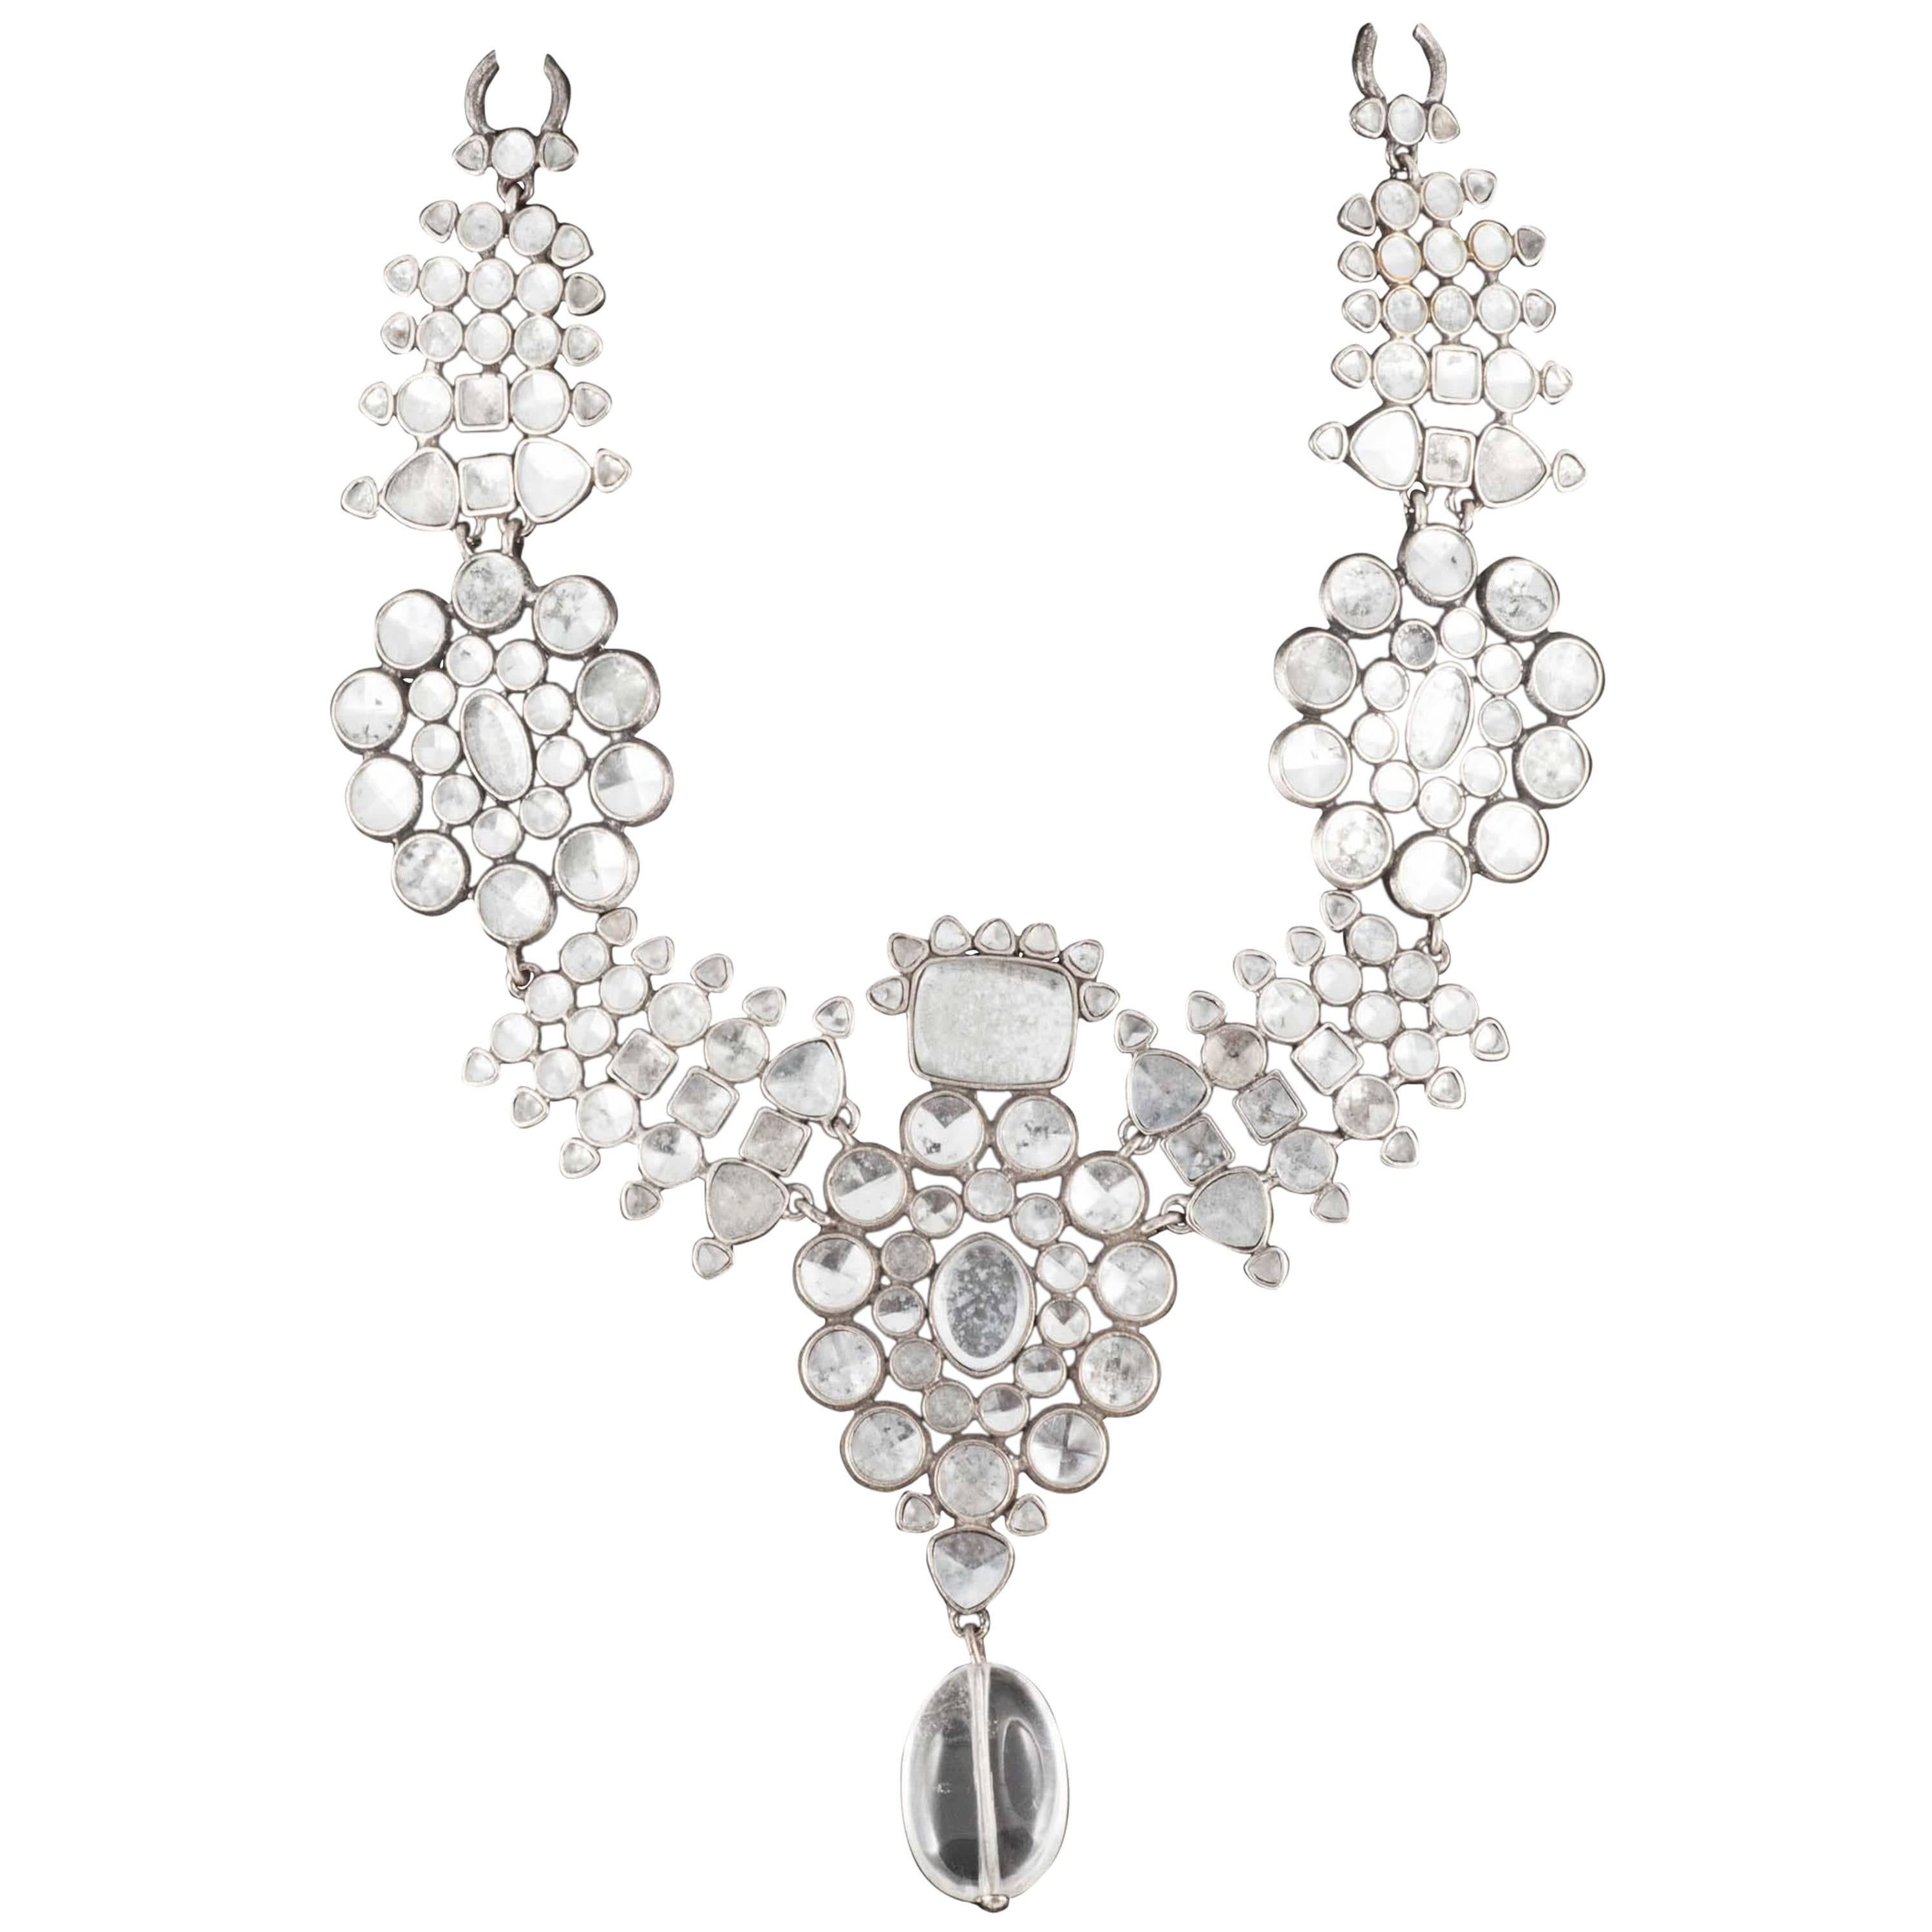  Majestic Moghul style necklace and matching drop earrings, Tom Ford for YSL.